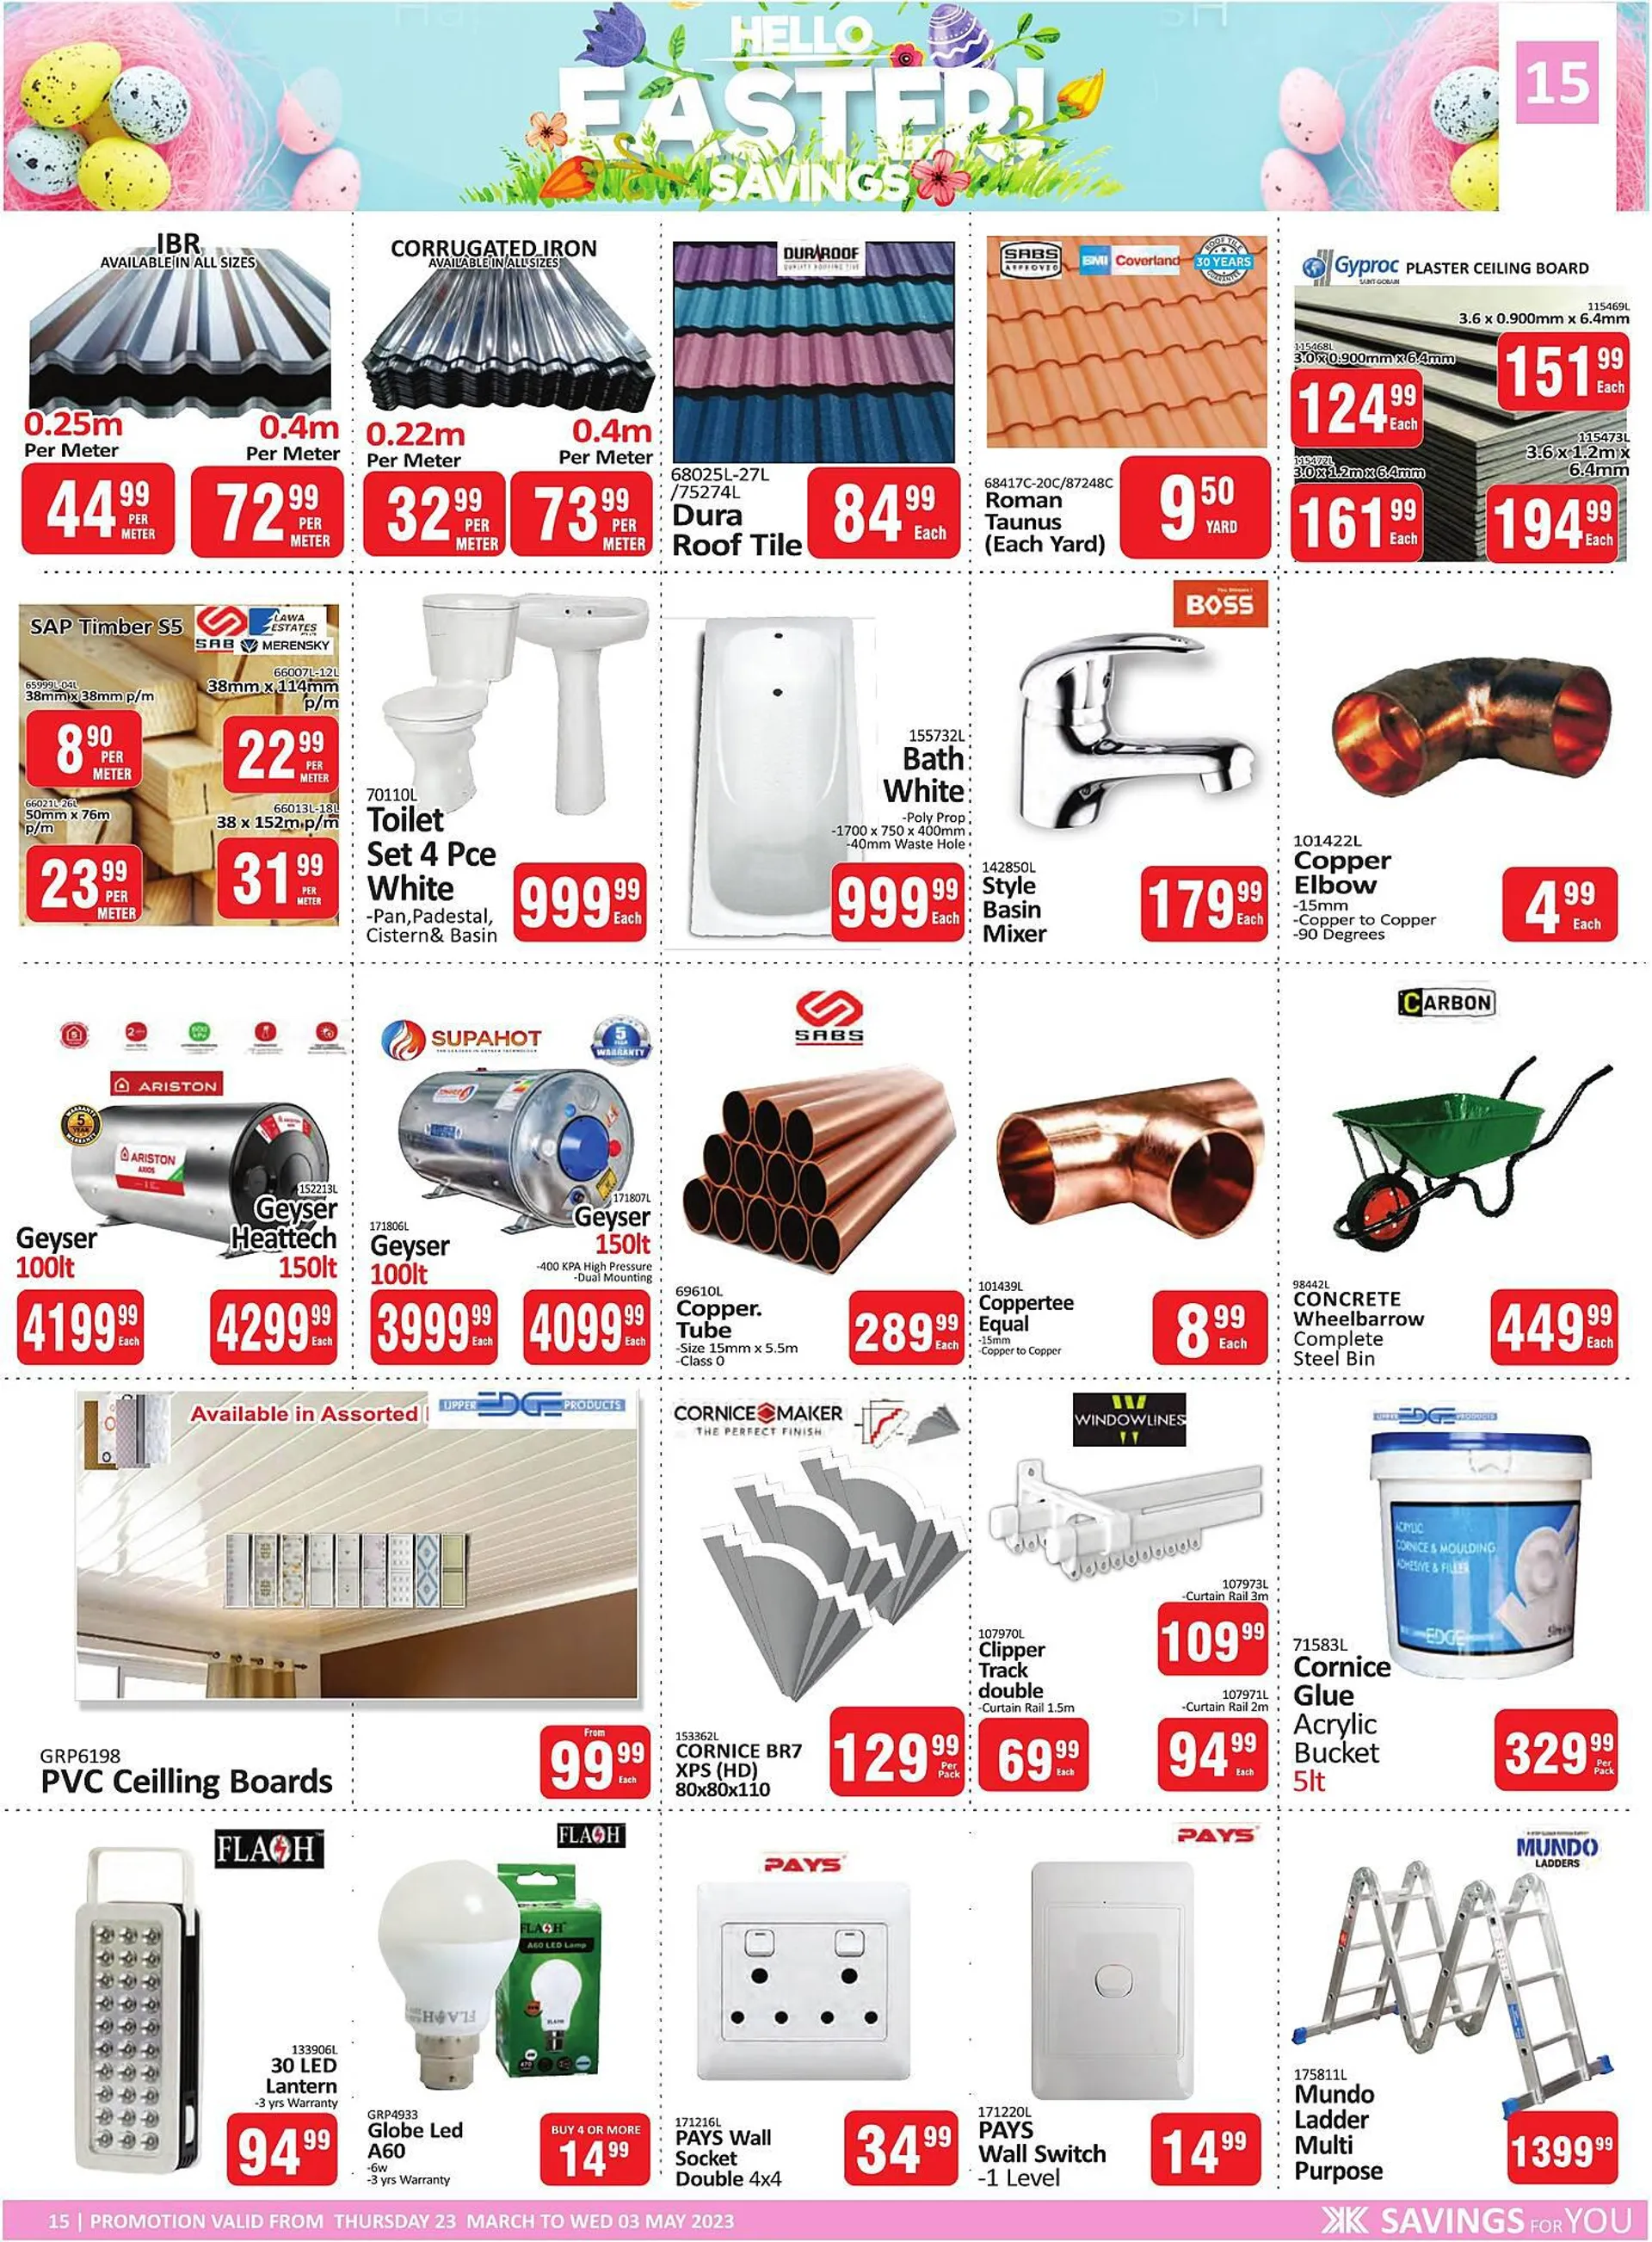 KitKat Cash and Carry catalogue - 15